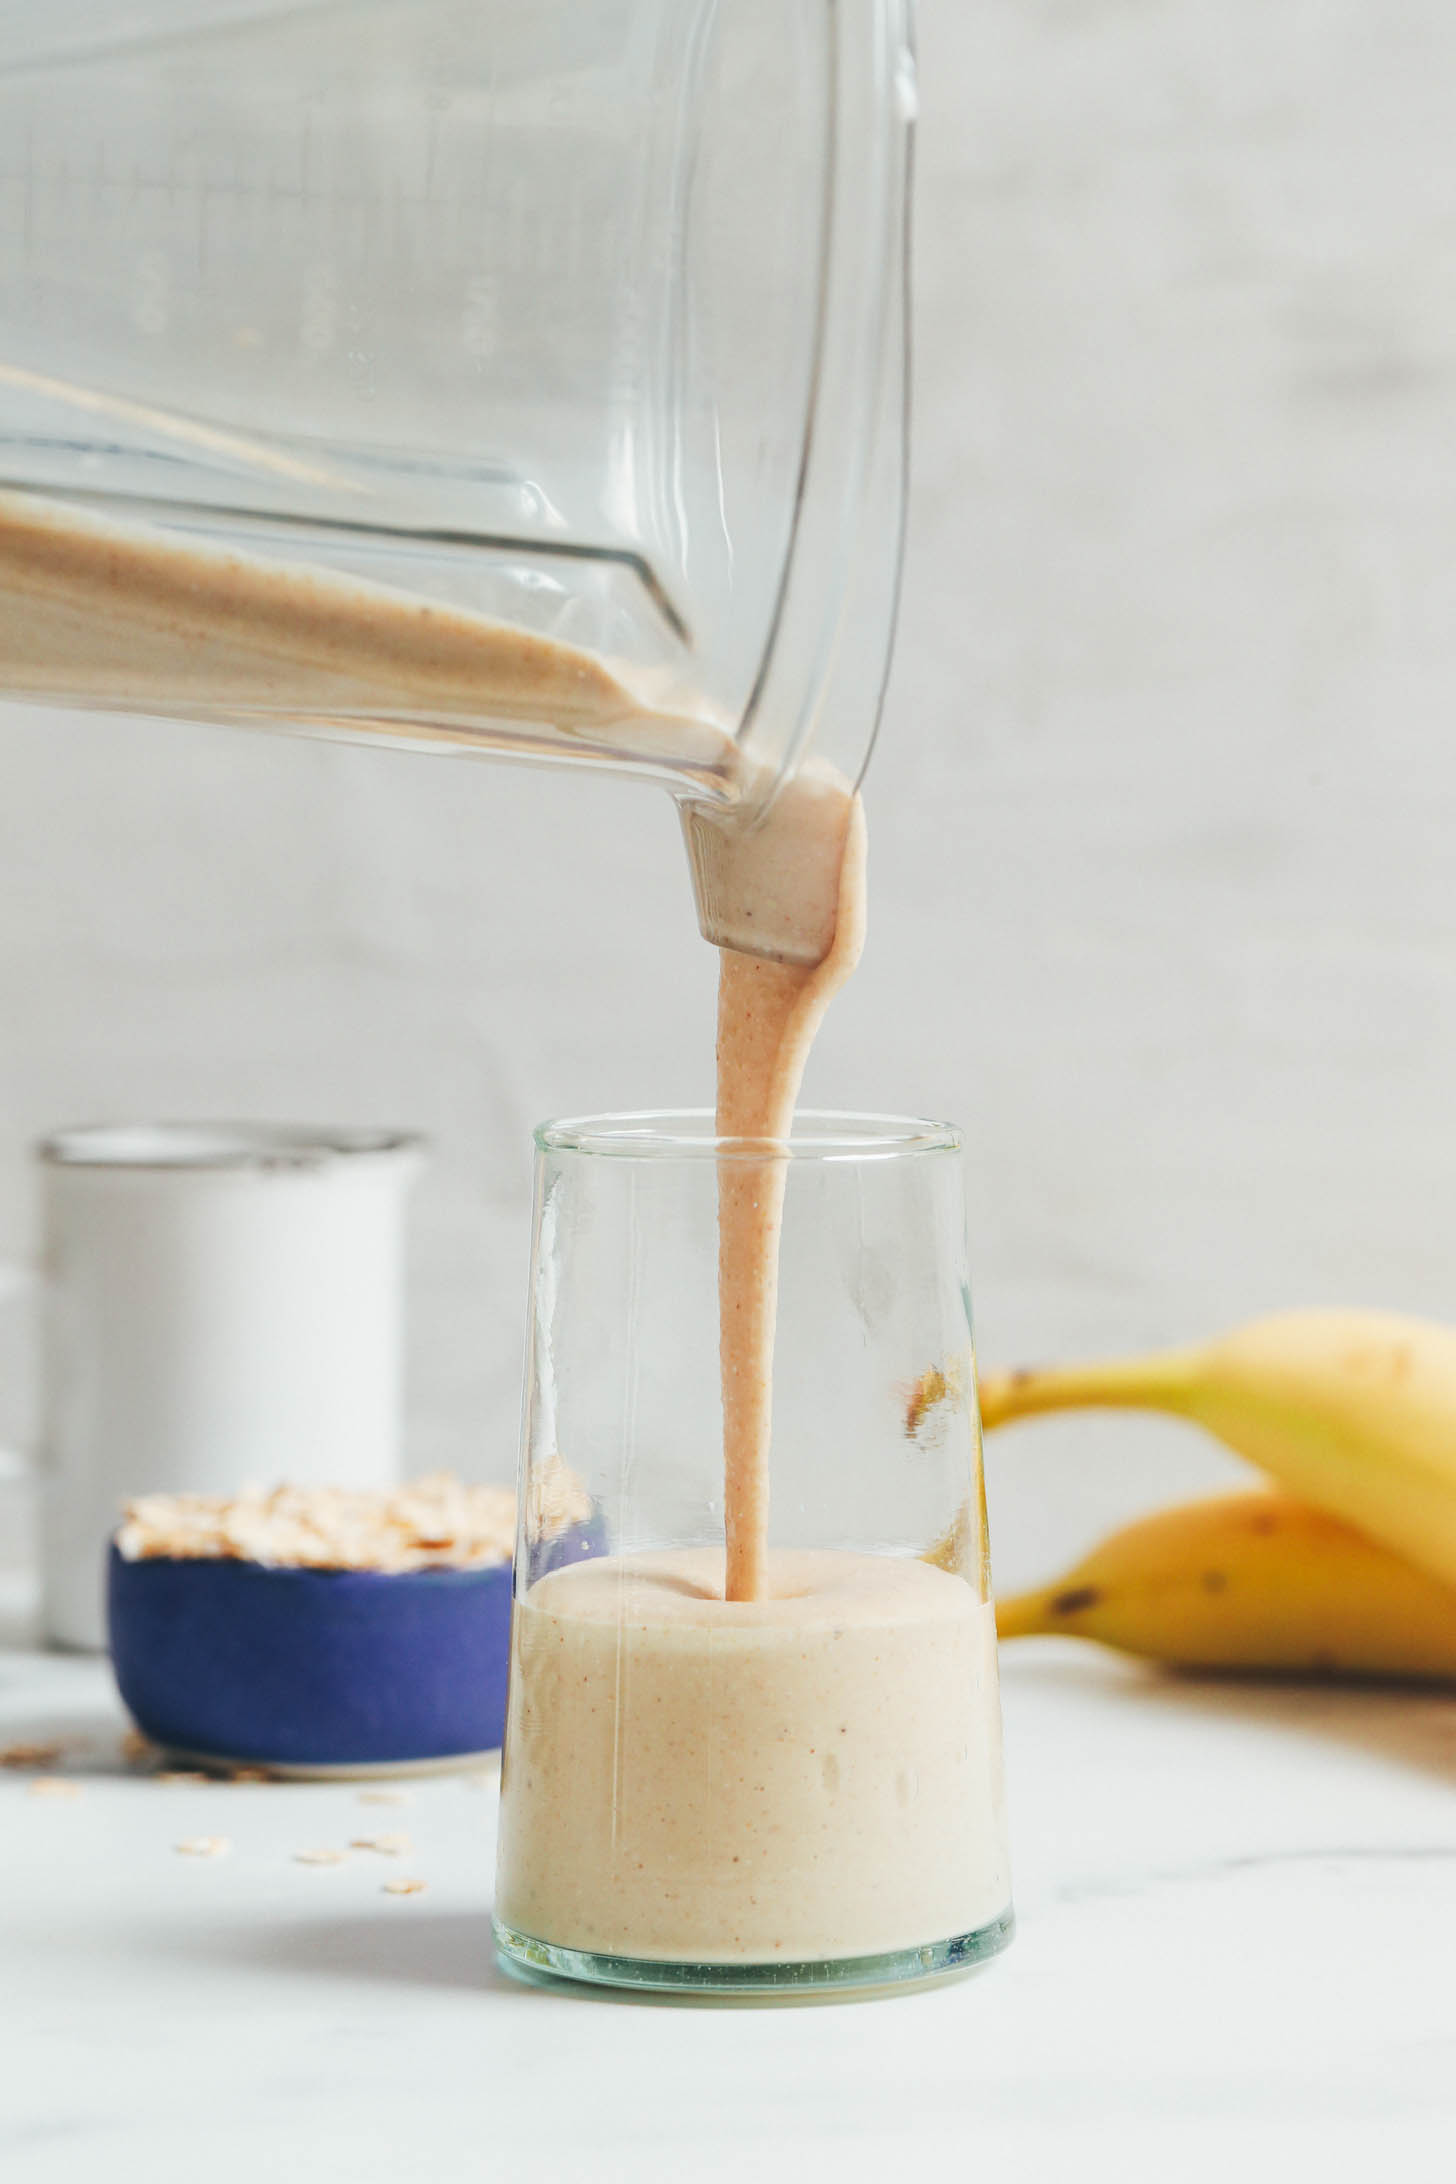 Pouring a peanut butter banana smoothie from a blender into a glass